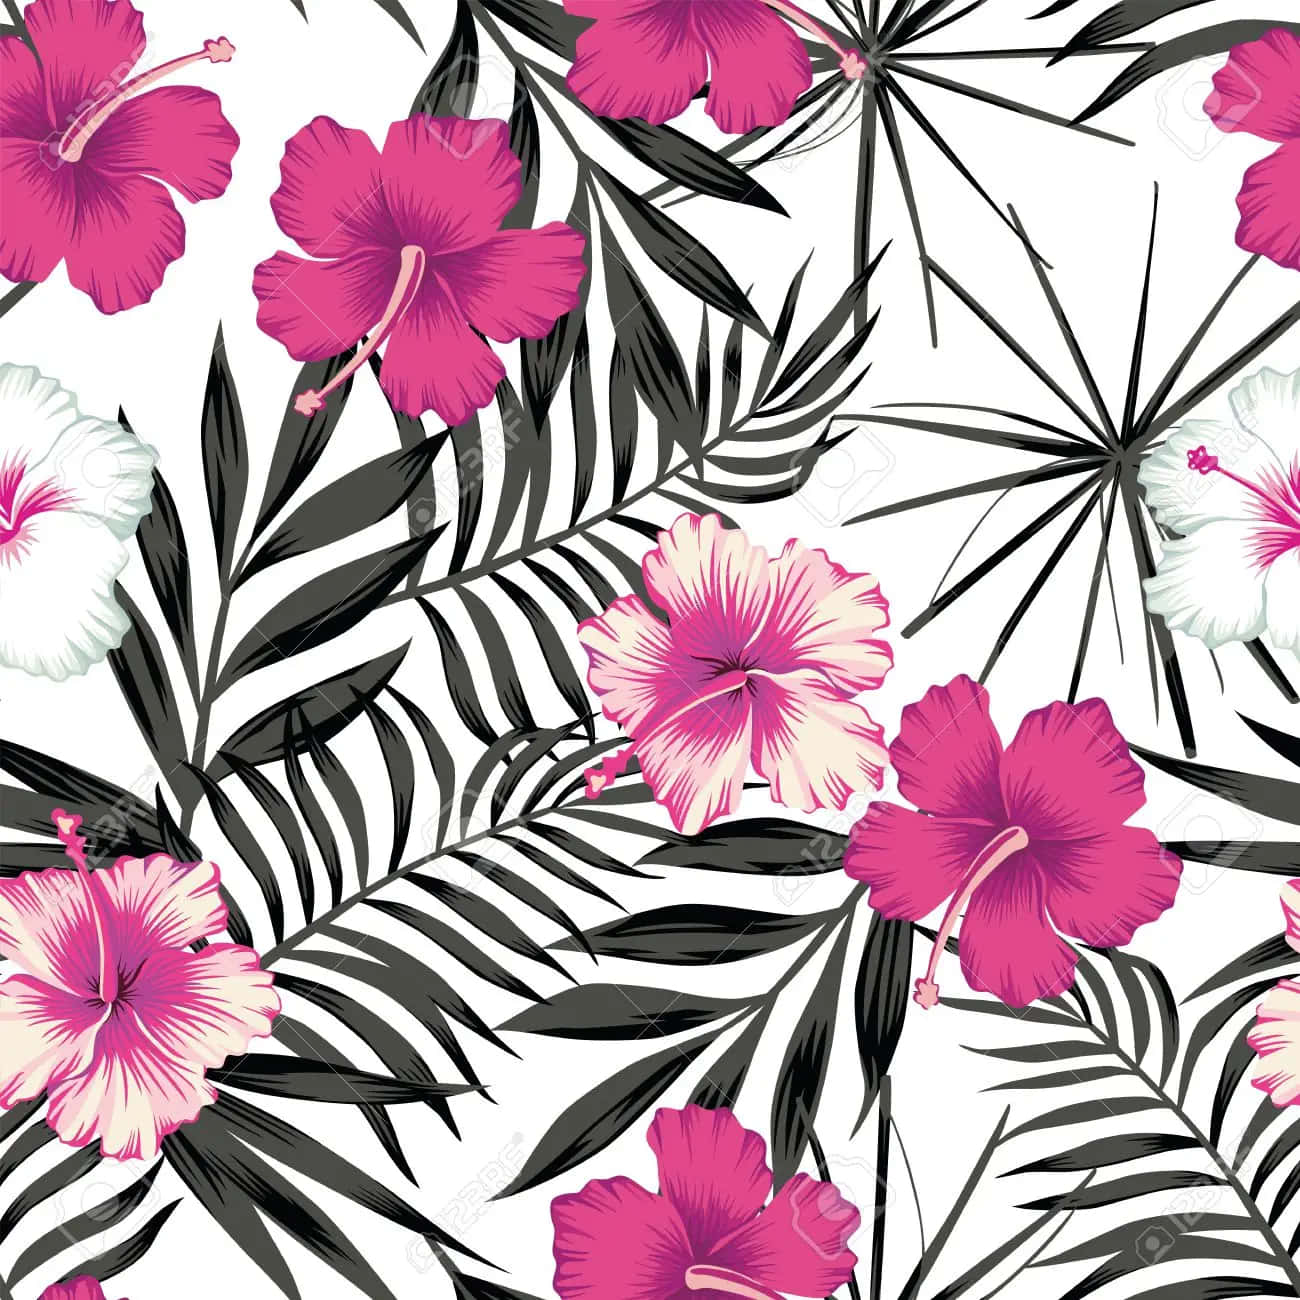 A Vivid Contrast of Pink and Black Wallpaper